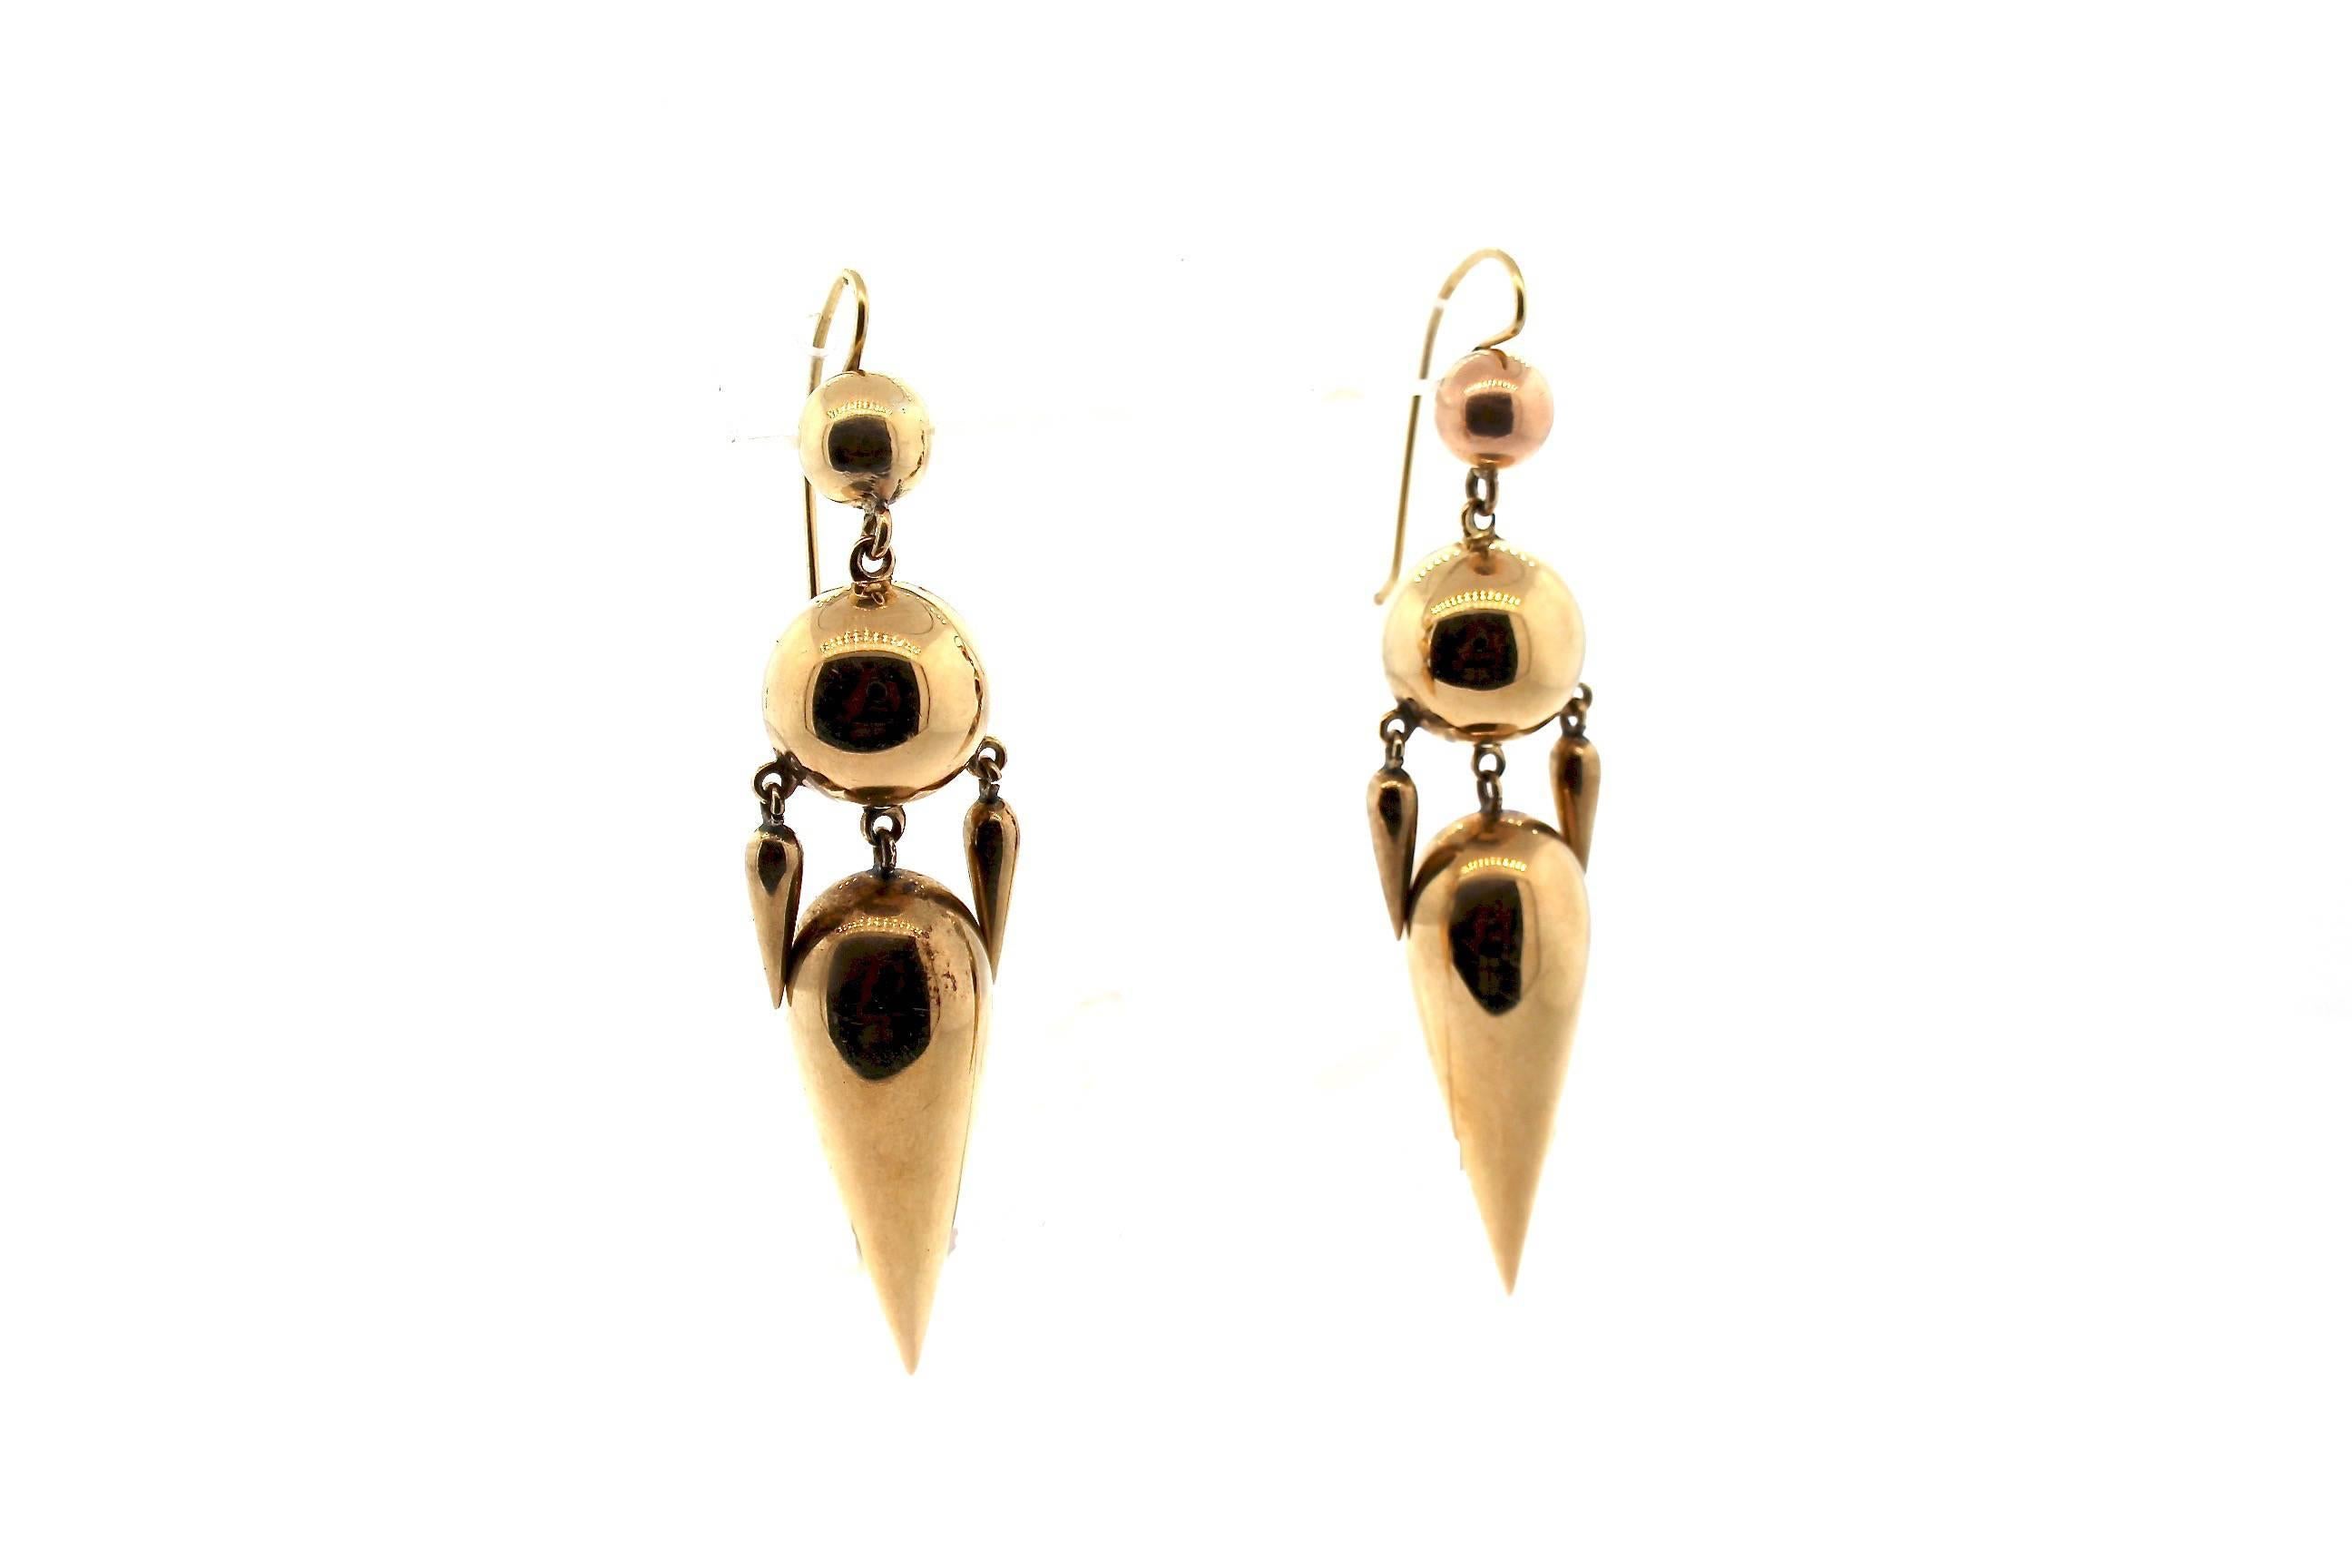 A lovely pair of Victorian hollow form 14k gold dart pendant earrings with movement and grace.  The earrings date to about 1880, and are two hollow gold balls suspending a large hollow dart shape and two smaller accents darts.  The pieces are